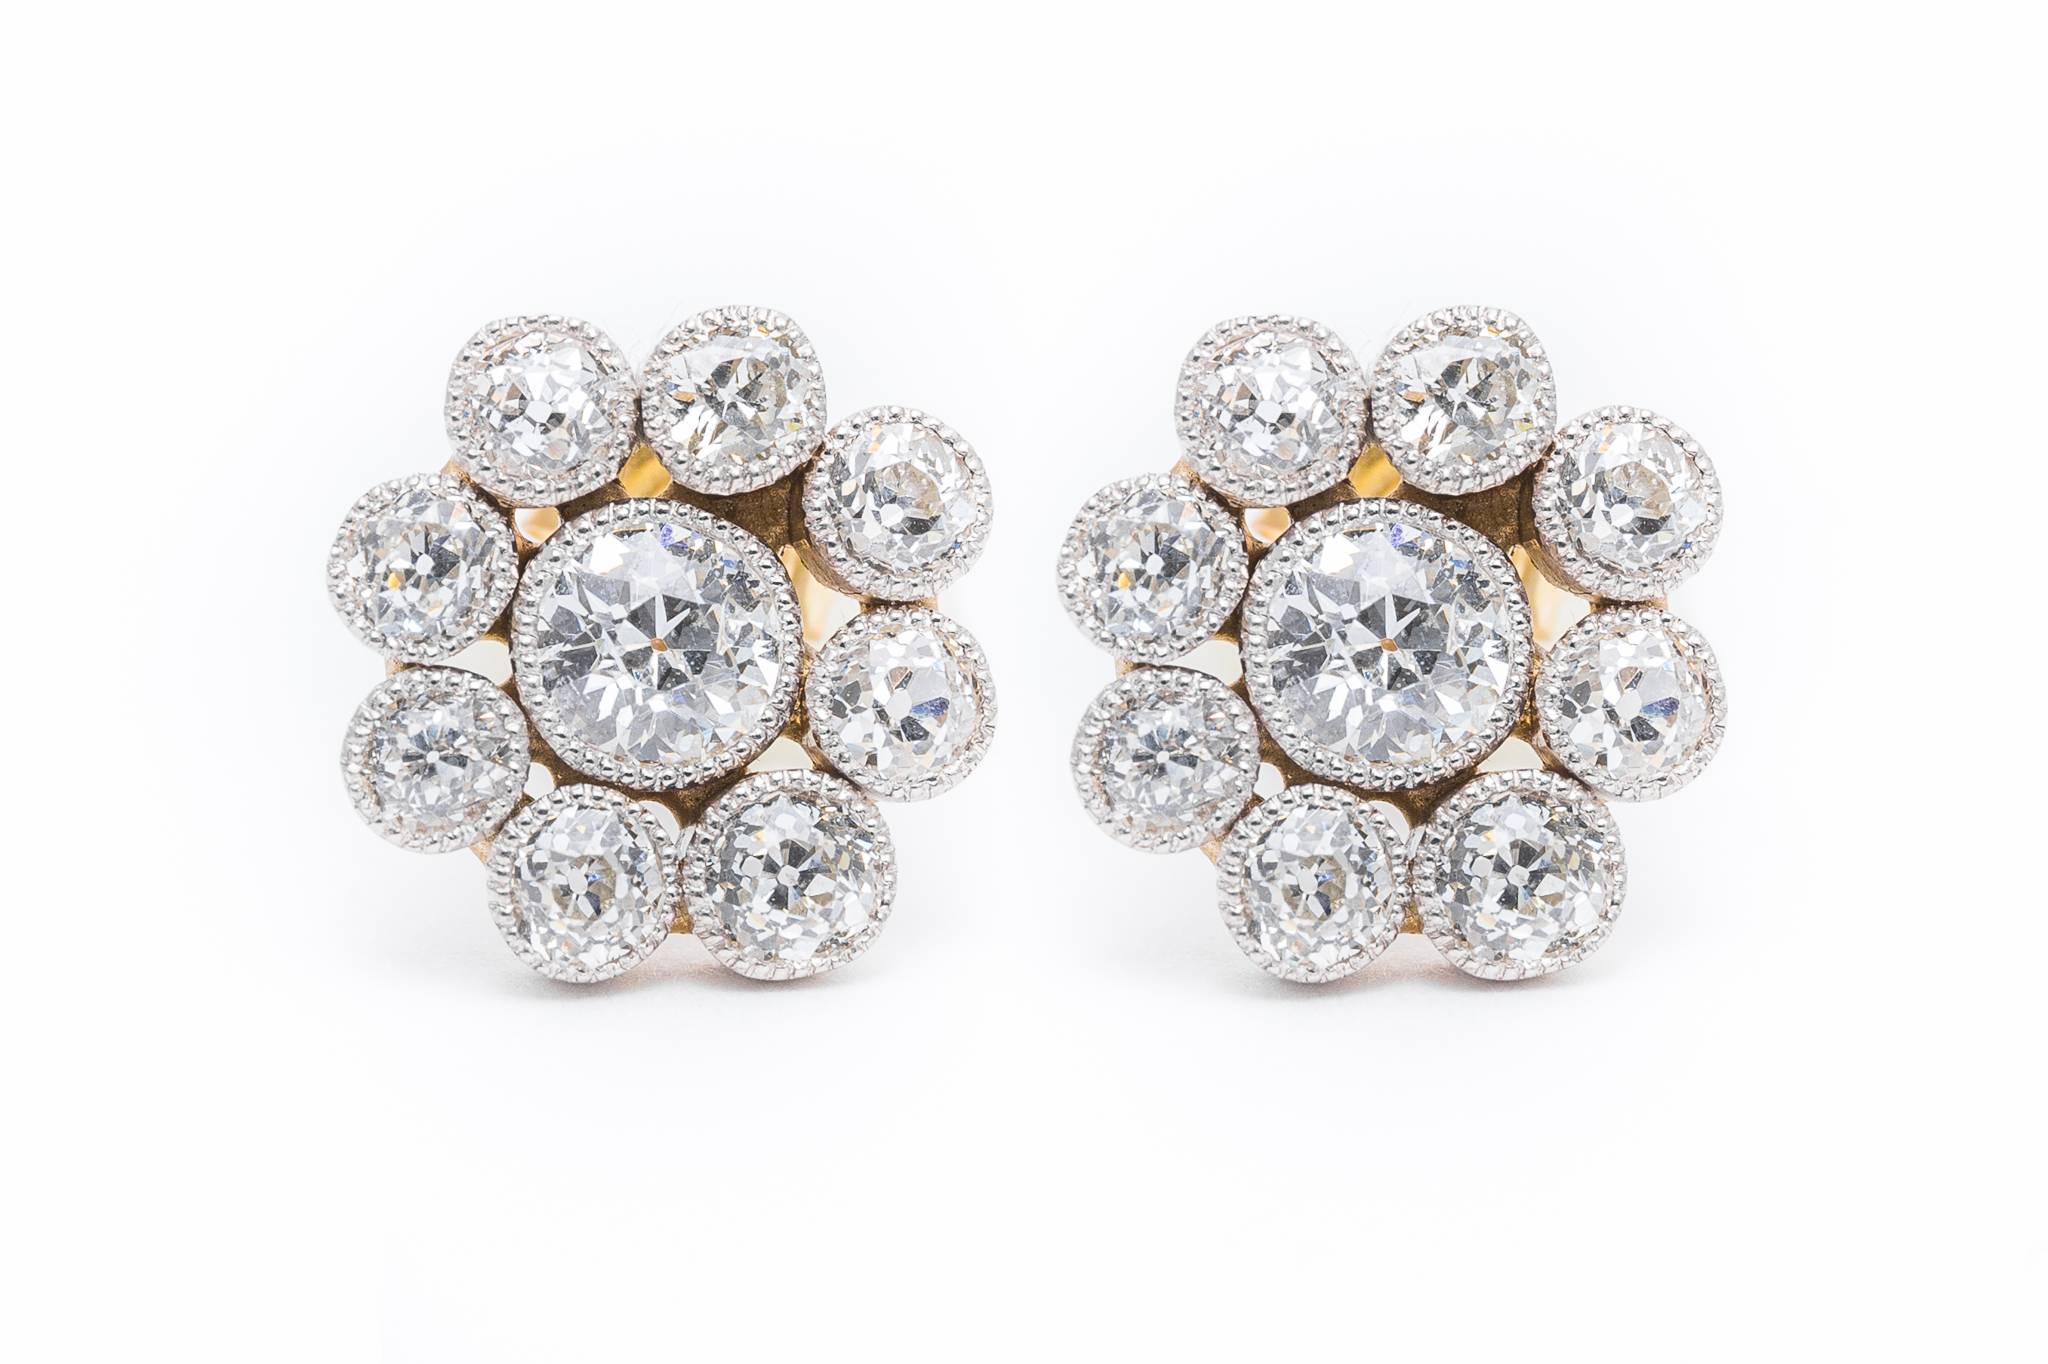 Beacon Hill Jewelers Presents:

A beautiful pair of original edwardian period diamond earrings in luxurious platinum. Each featuring a center diamond surrounded by accenting diamonds, these earrings are a classic example of a timeless favorite, halo